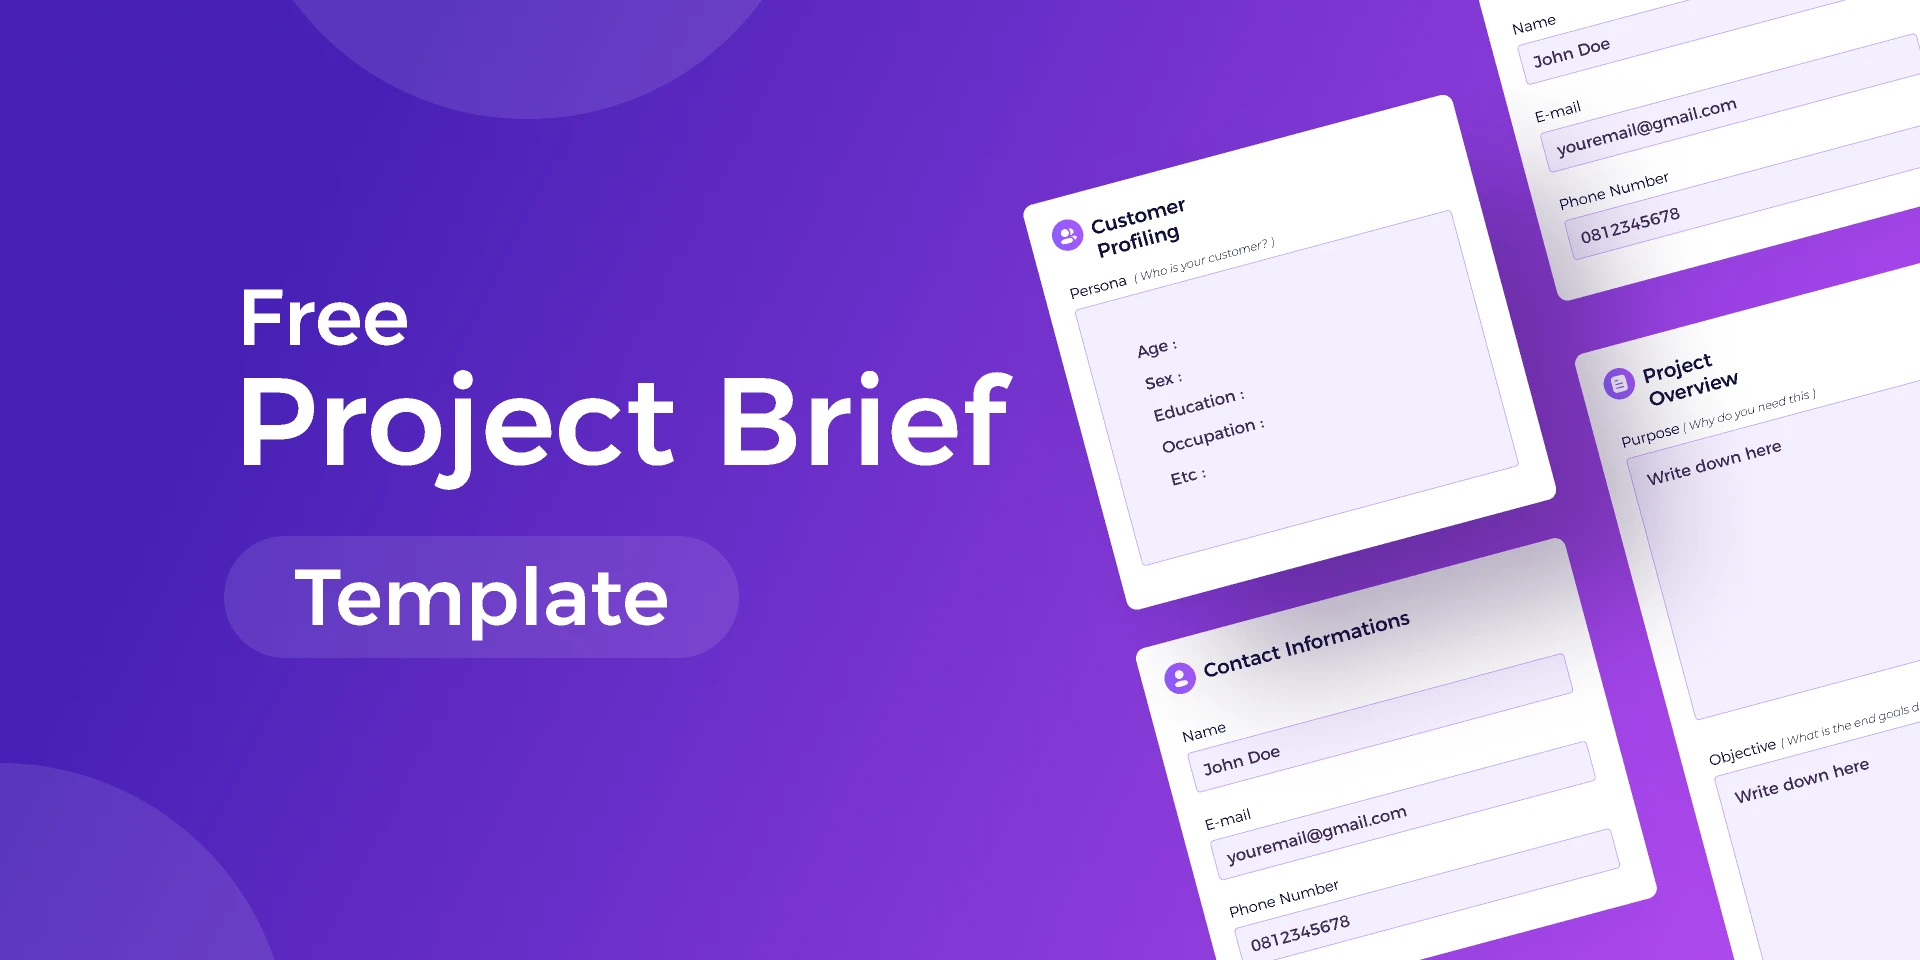 Free Project Brief Template for Figma and Adobe XD